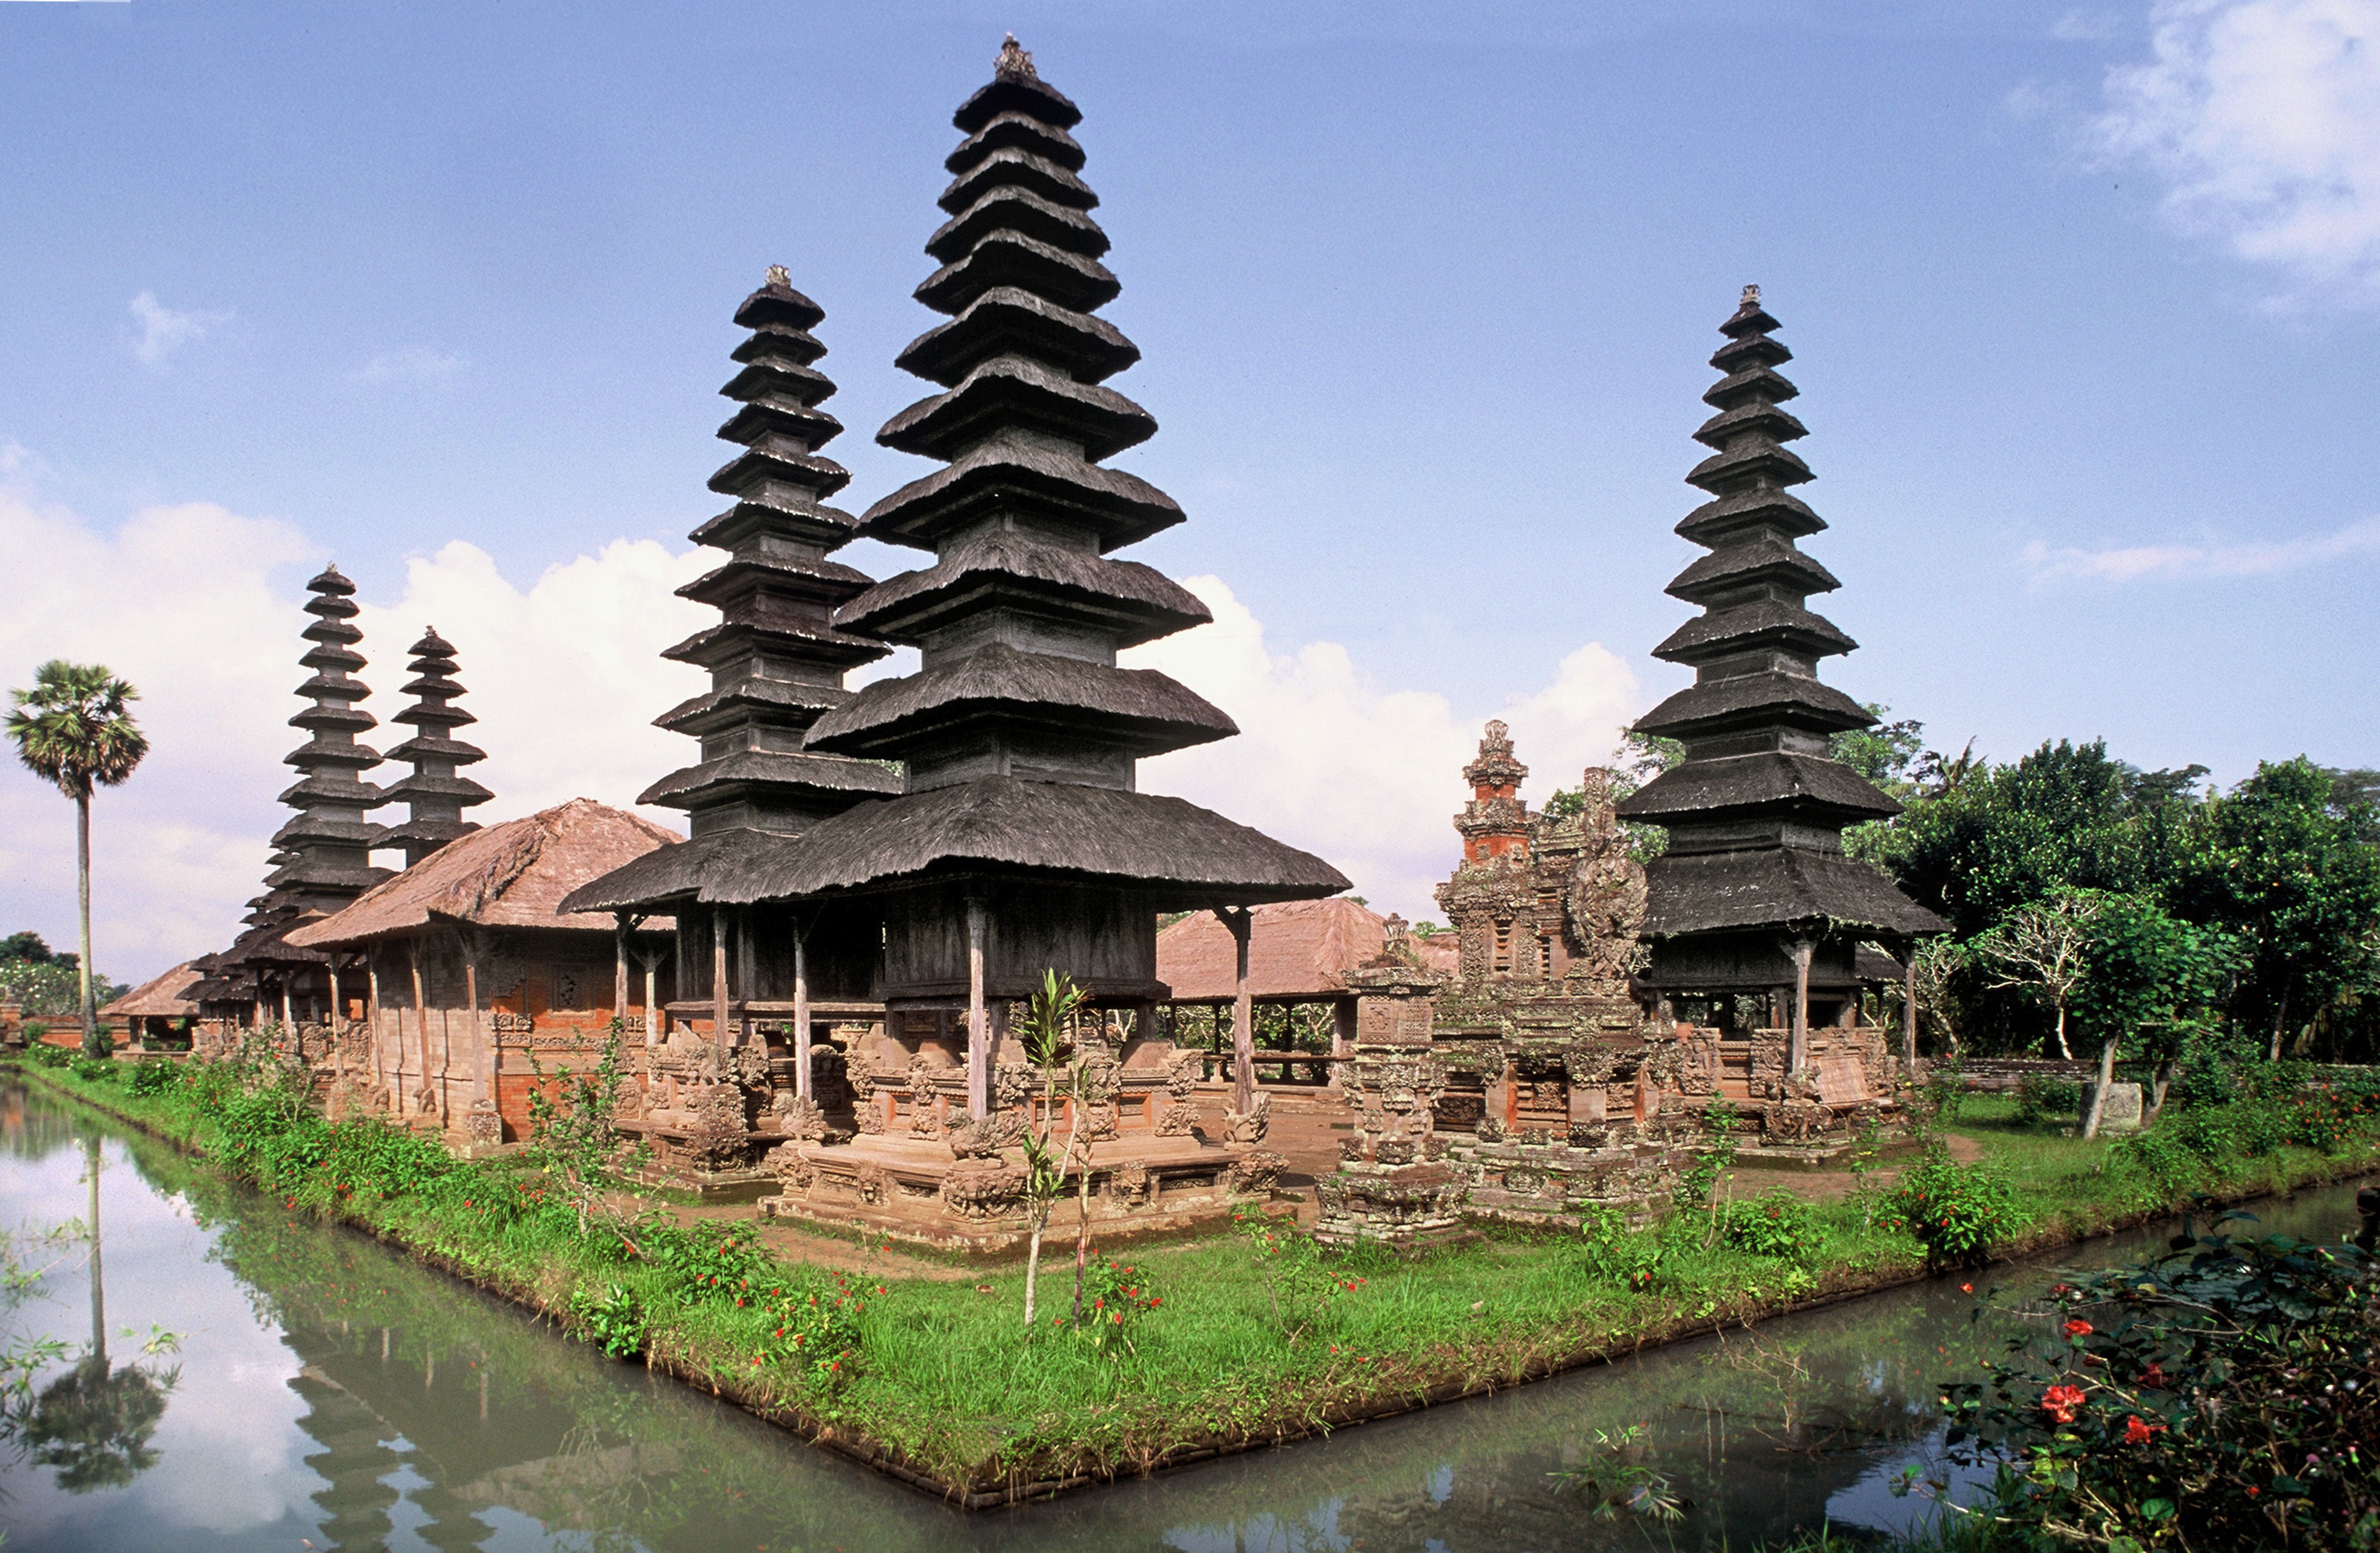 Temples in Bali That Should Not Be Missed